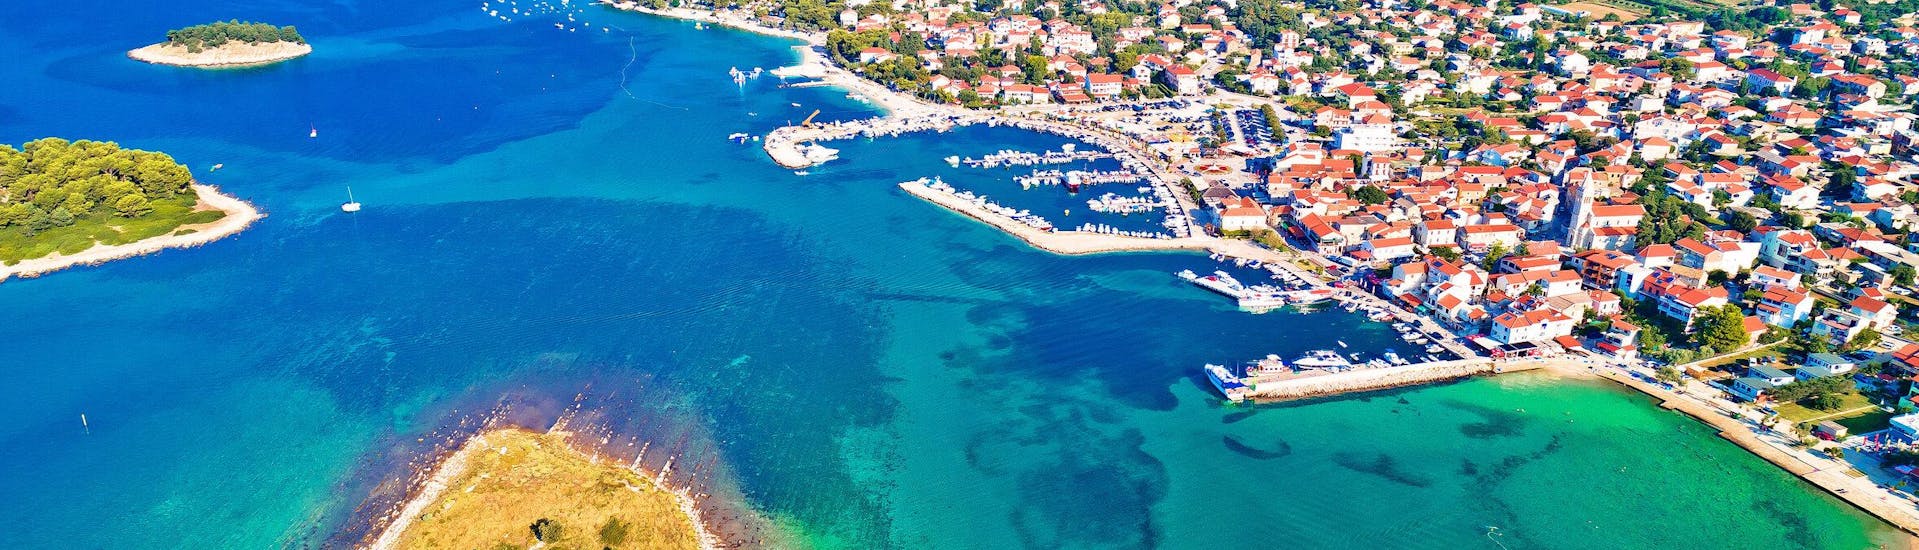 View from the air of the coast of Pakostane in Croatia.